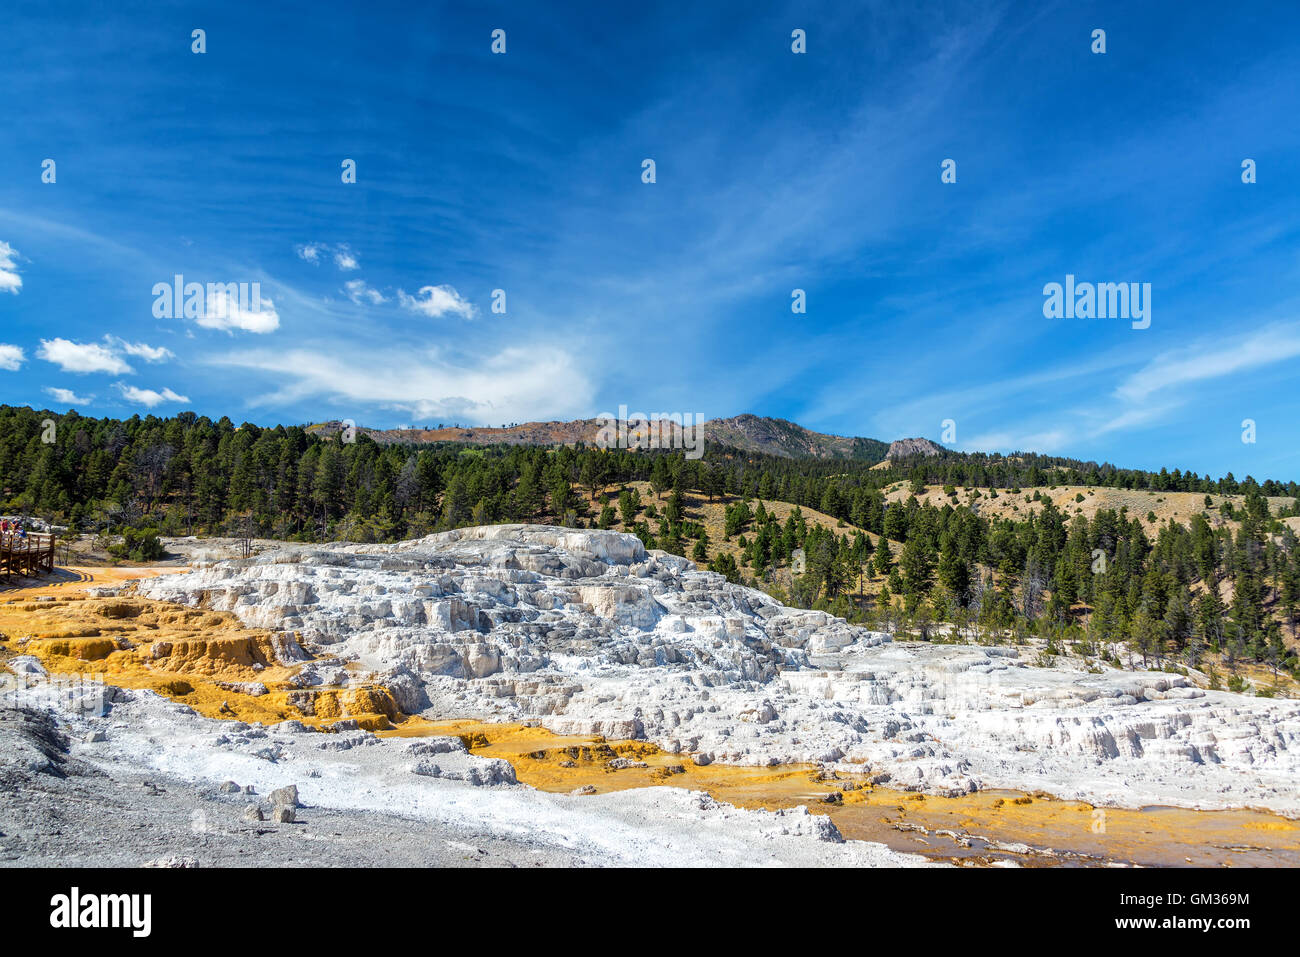 Travertine terrace landscape in Yellowstone National Park near Mammoth Hot Springs Stock Photo